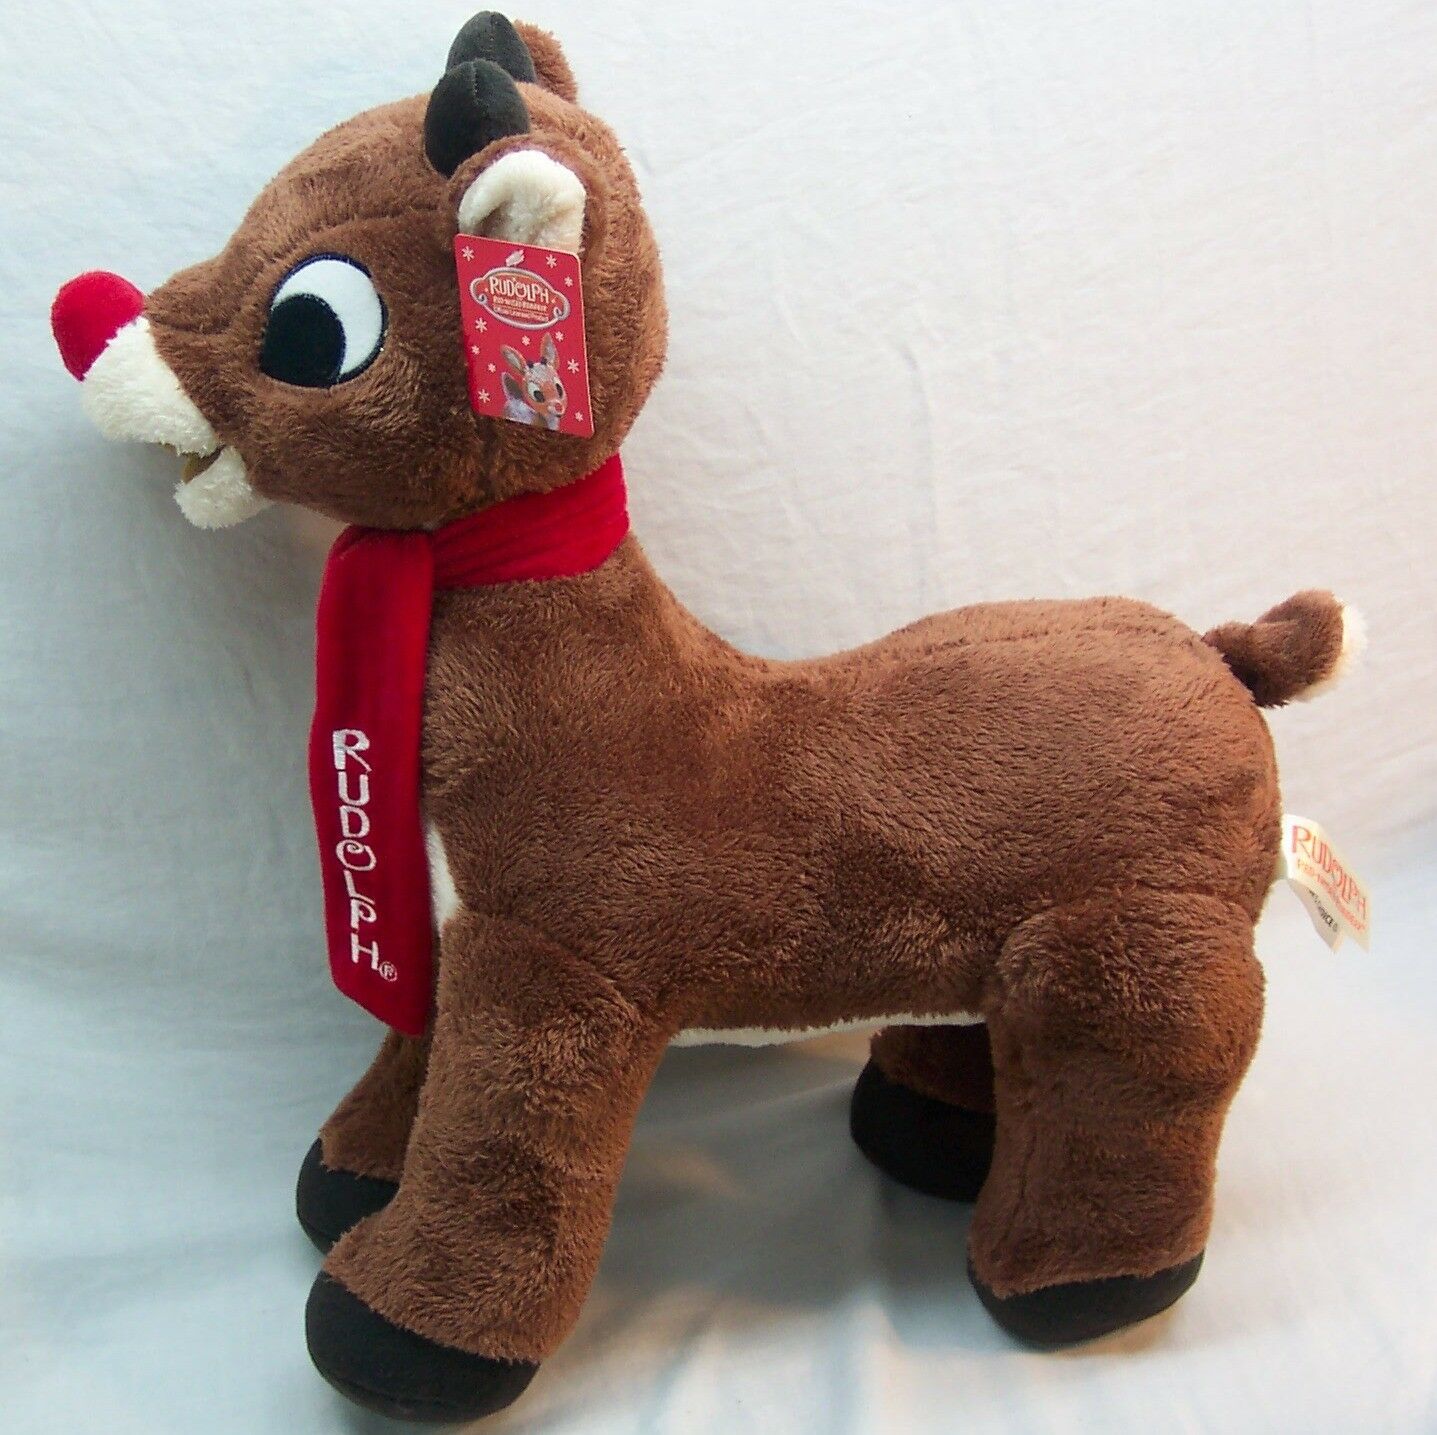 BIG Misfit Toys RUDOLPH THE RED-NOSED REINDEER 20